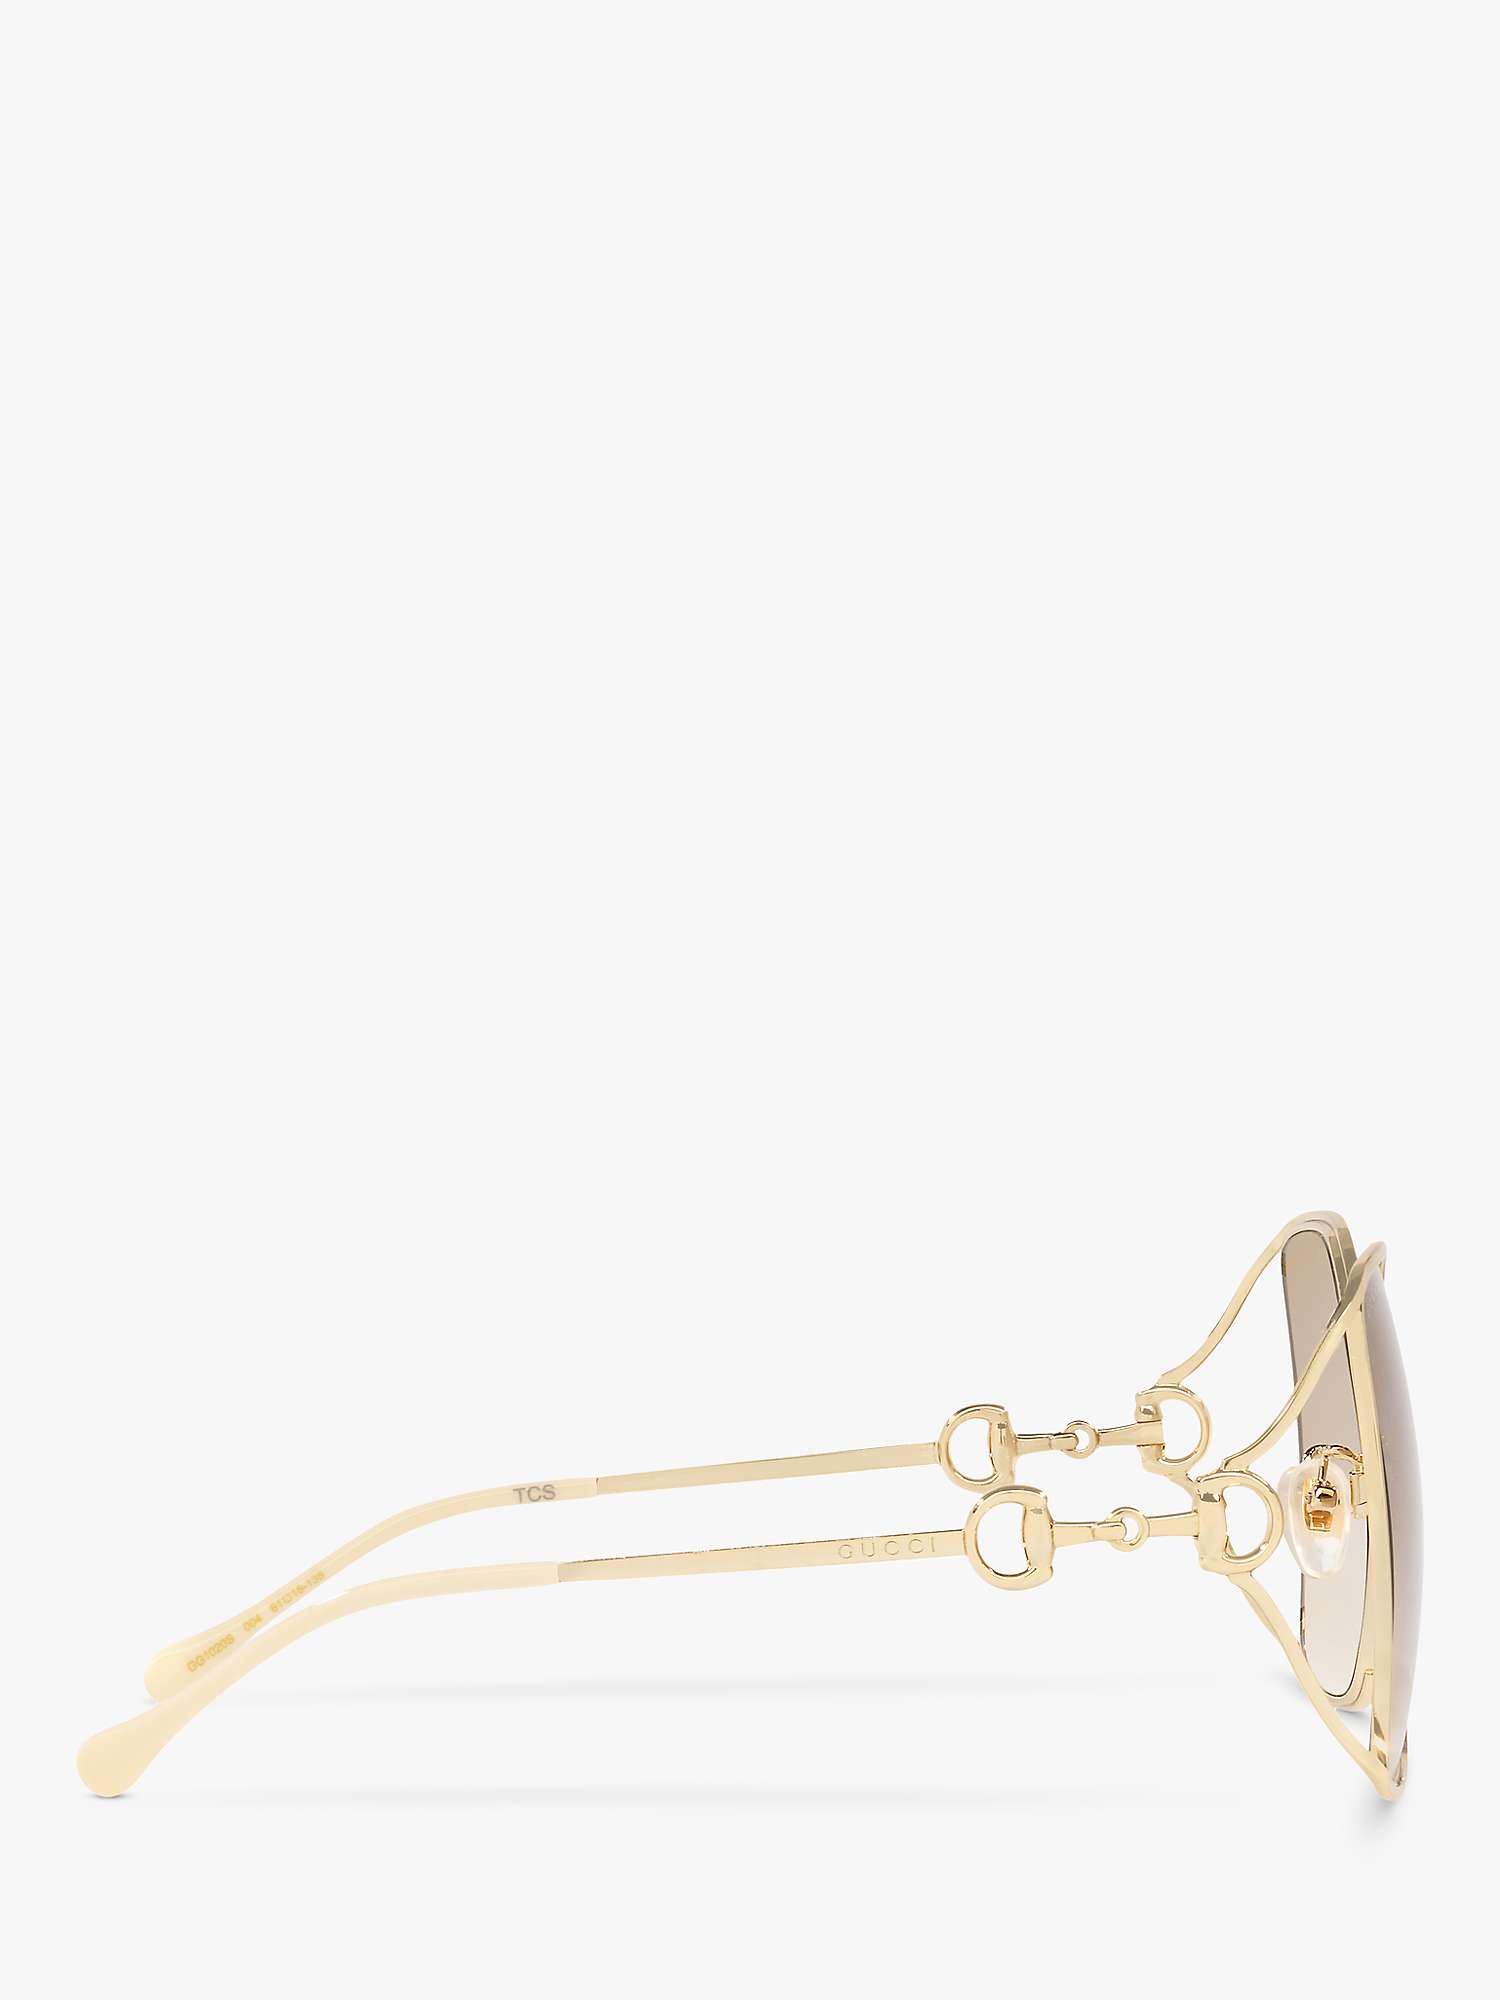 Buy Gucci GG1020S Women's Square Sunglasses, Gold/Brown Gradient Online at johnlewis.com